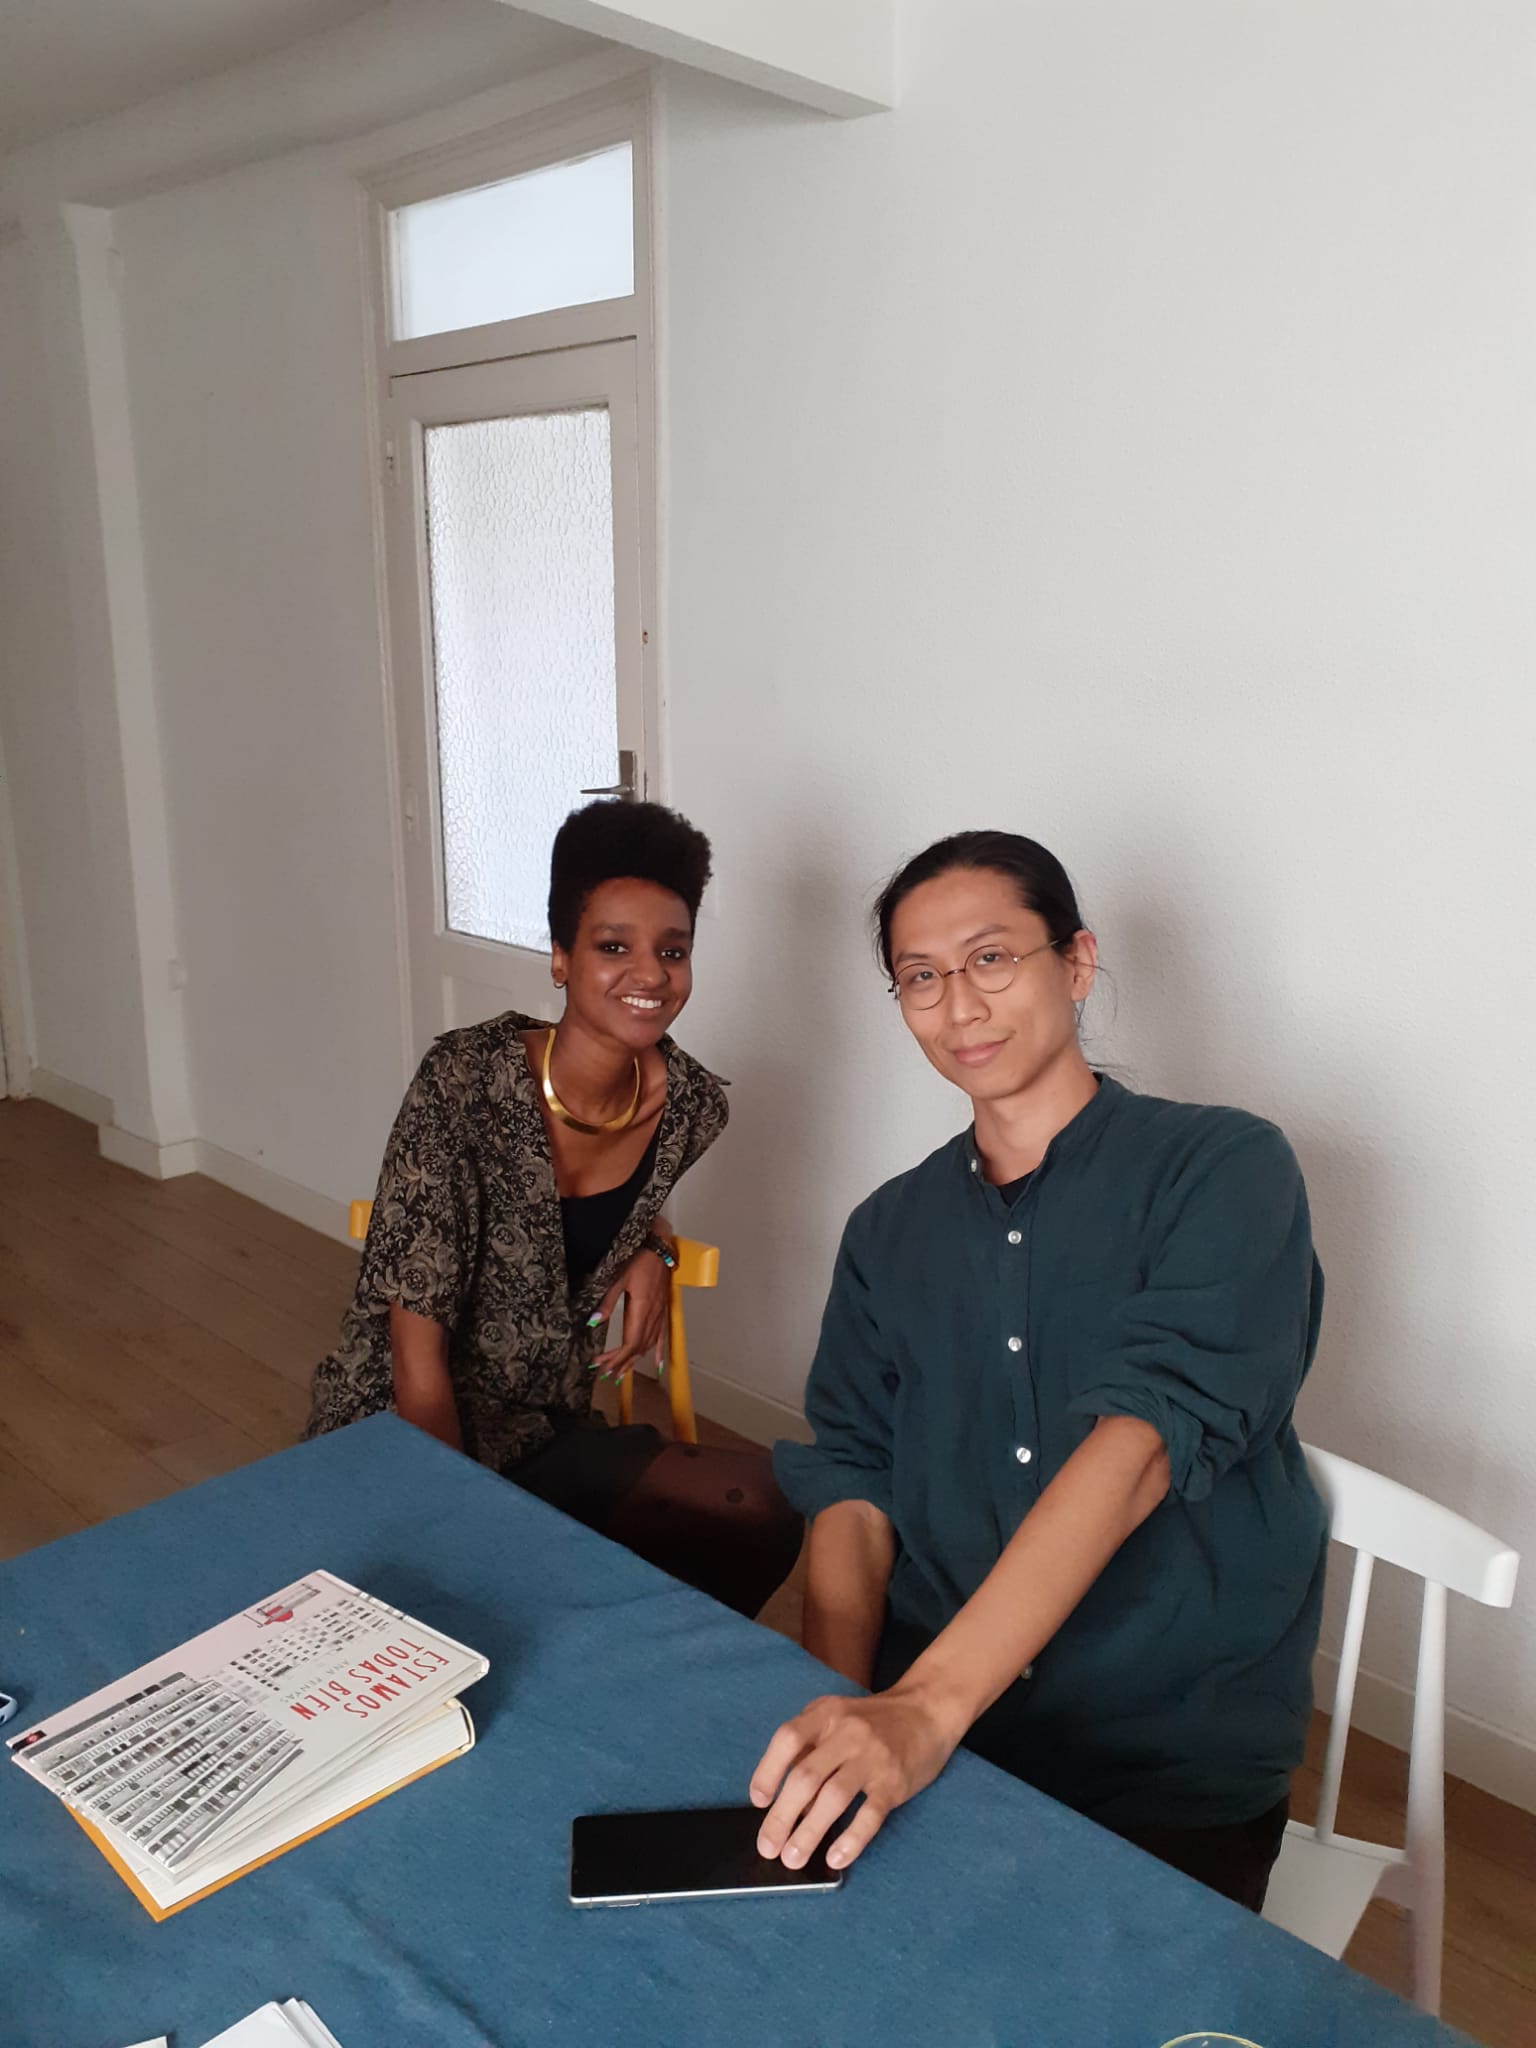 Photo with Sudanese artist Alaa Satir at the residency.